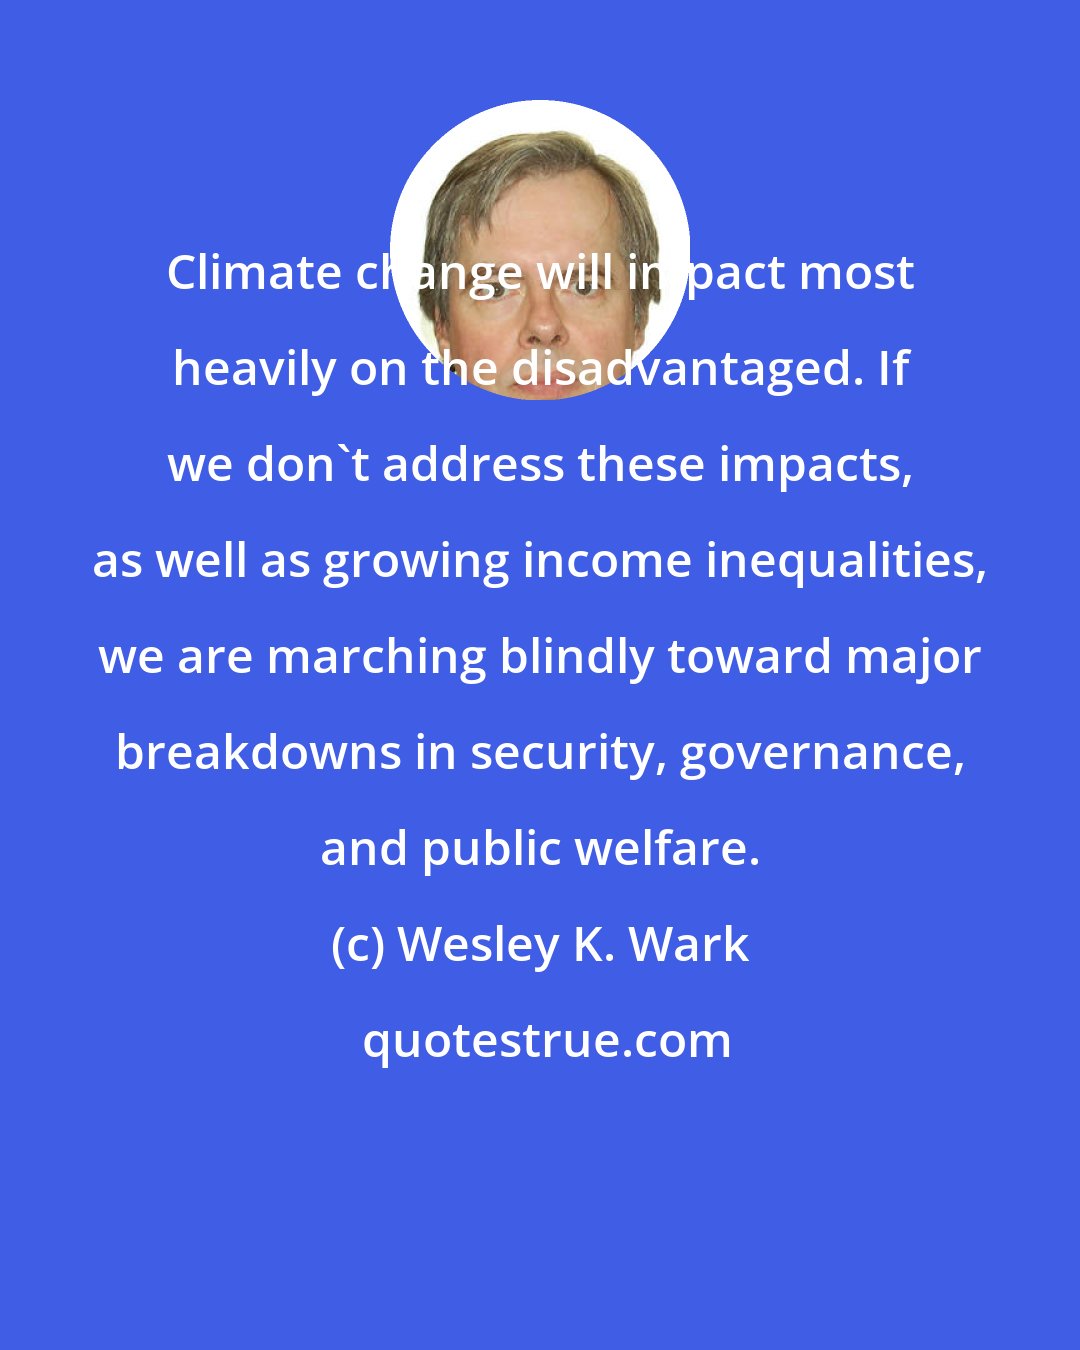 Wesley K. Wark: Climate change will impact most heavily on the disadvantaged. If we don't address these impacts, as well as growing income inequalities, we are marching blindly toward major breakdowns in security, governance, and public welfare.